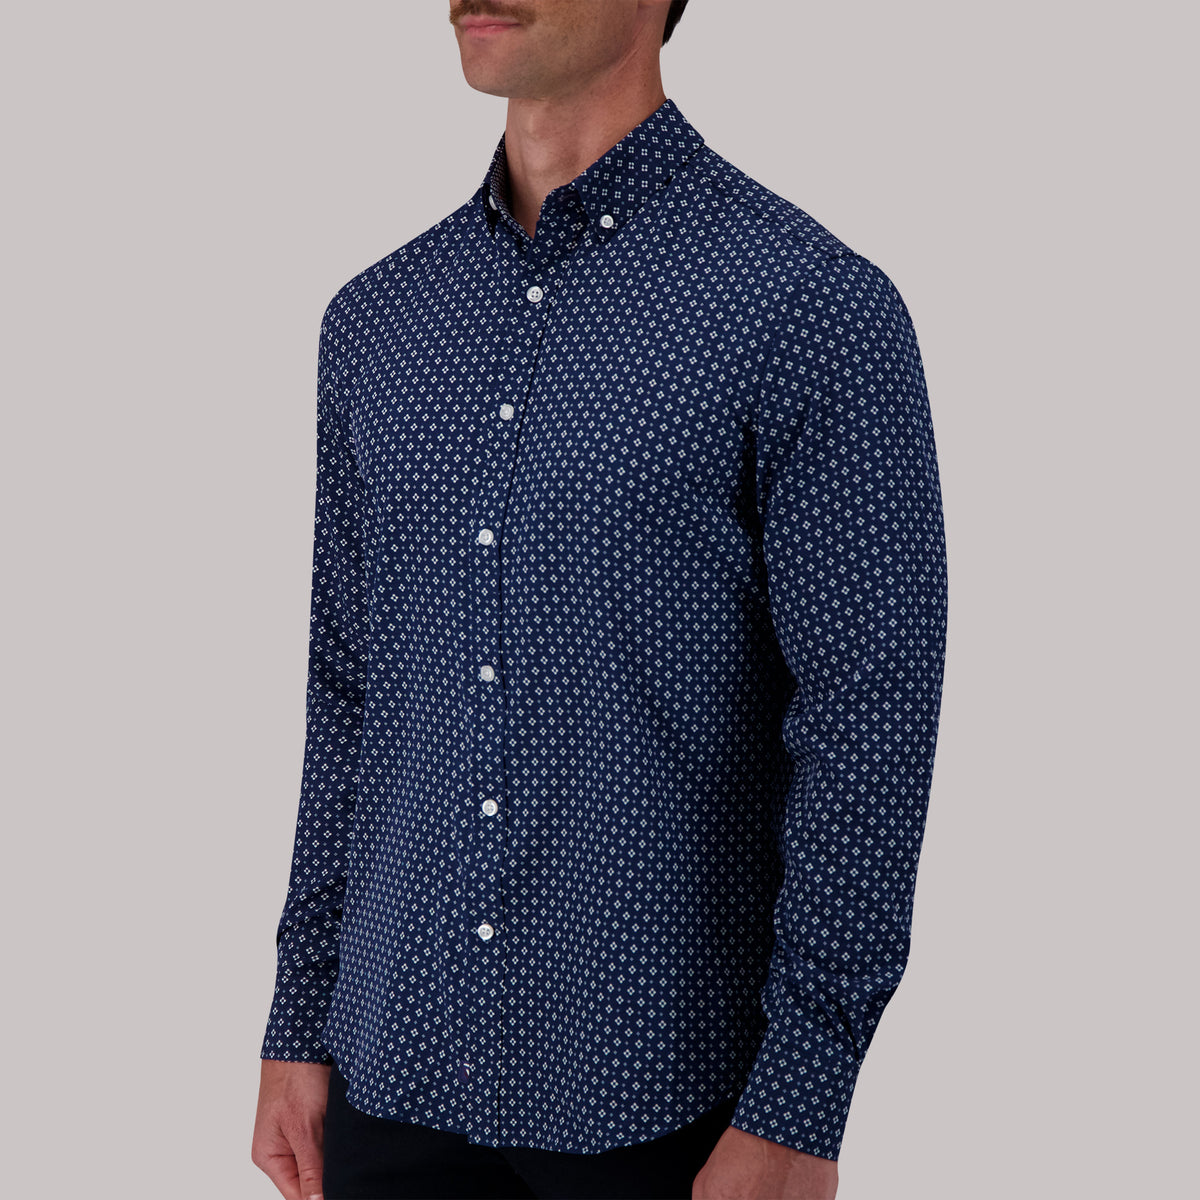 Model Side View of Long Sleeve 4-Way Sport Shirt with Floral Print in Navy